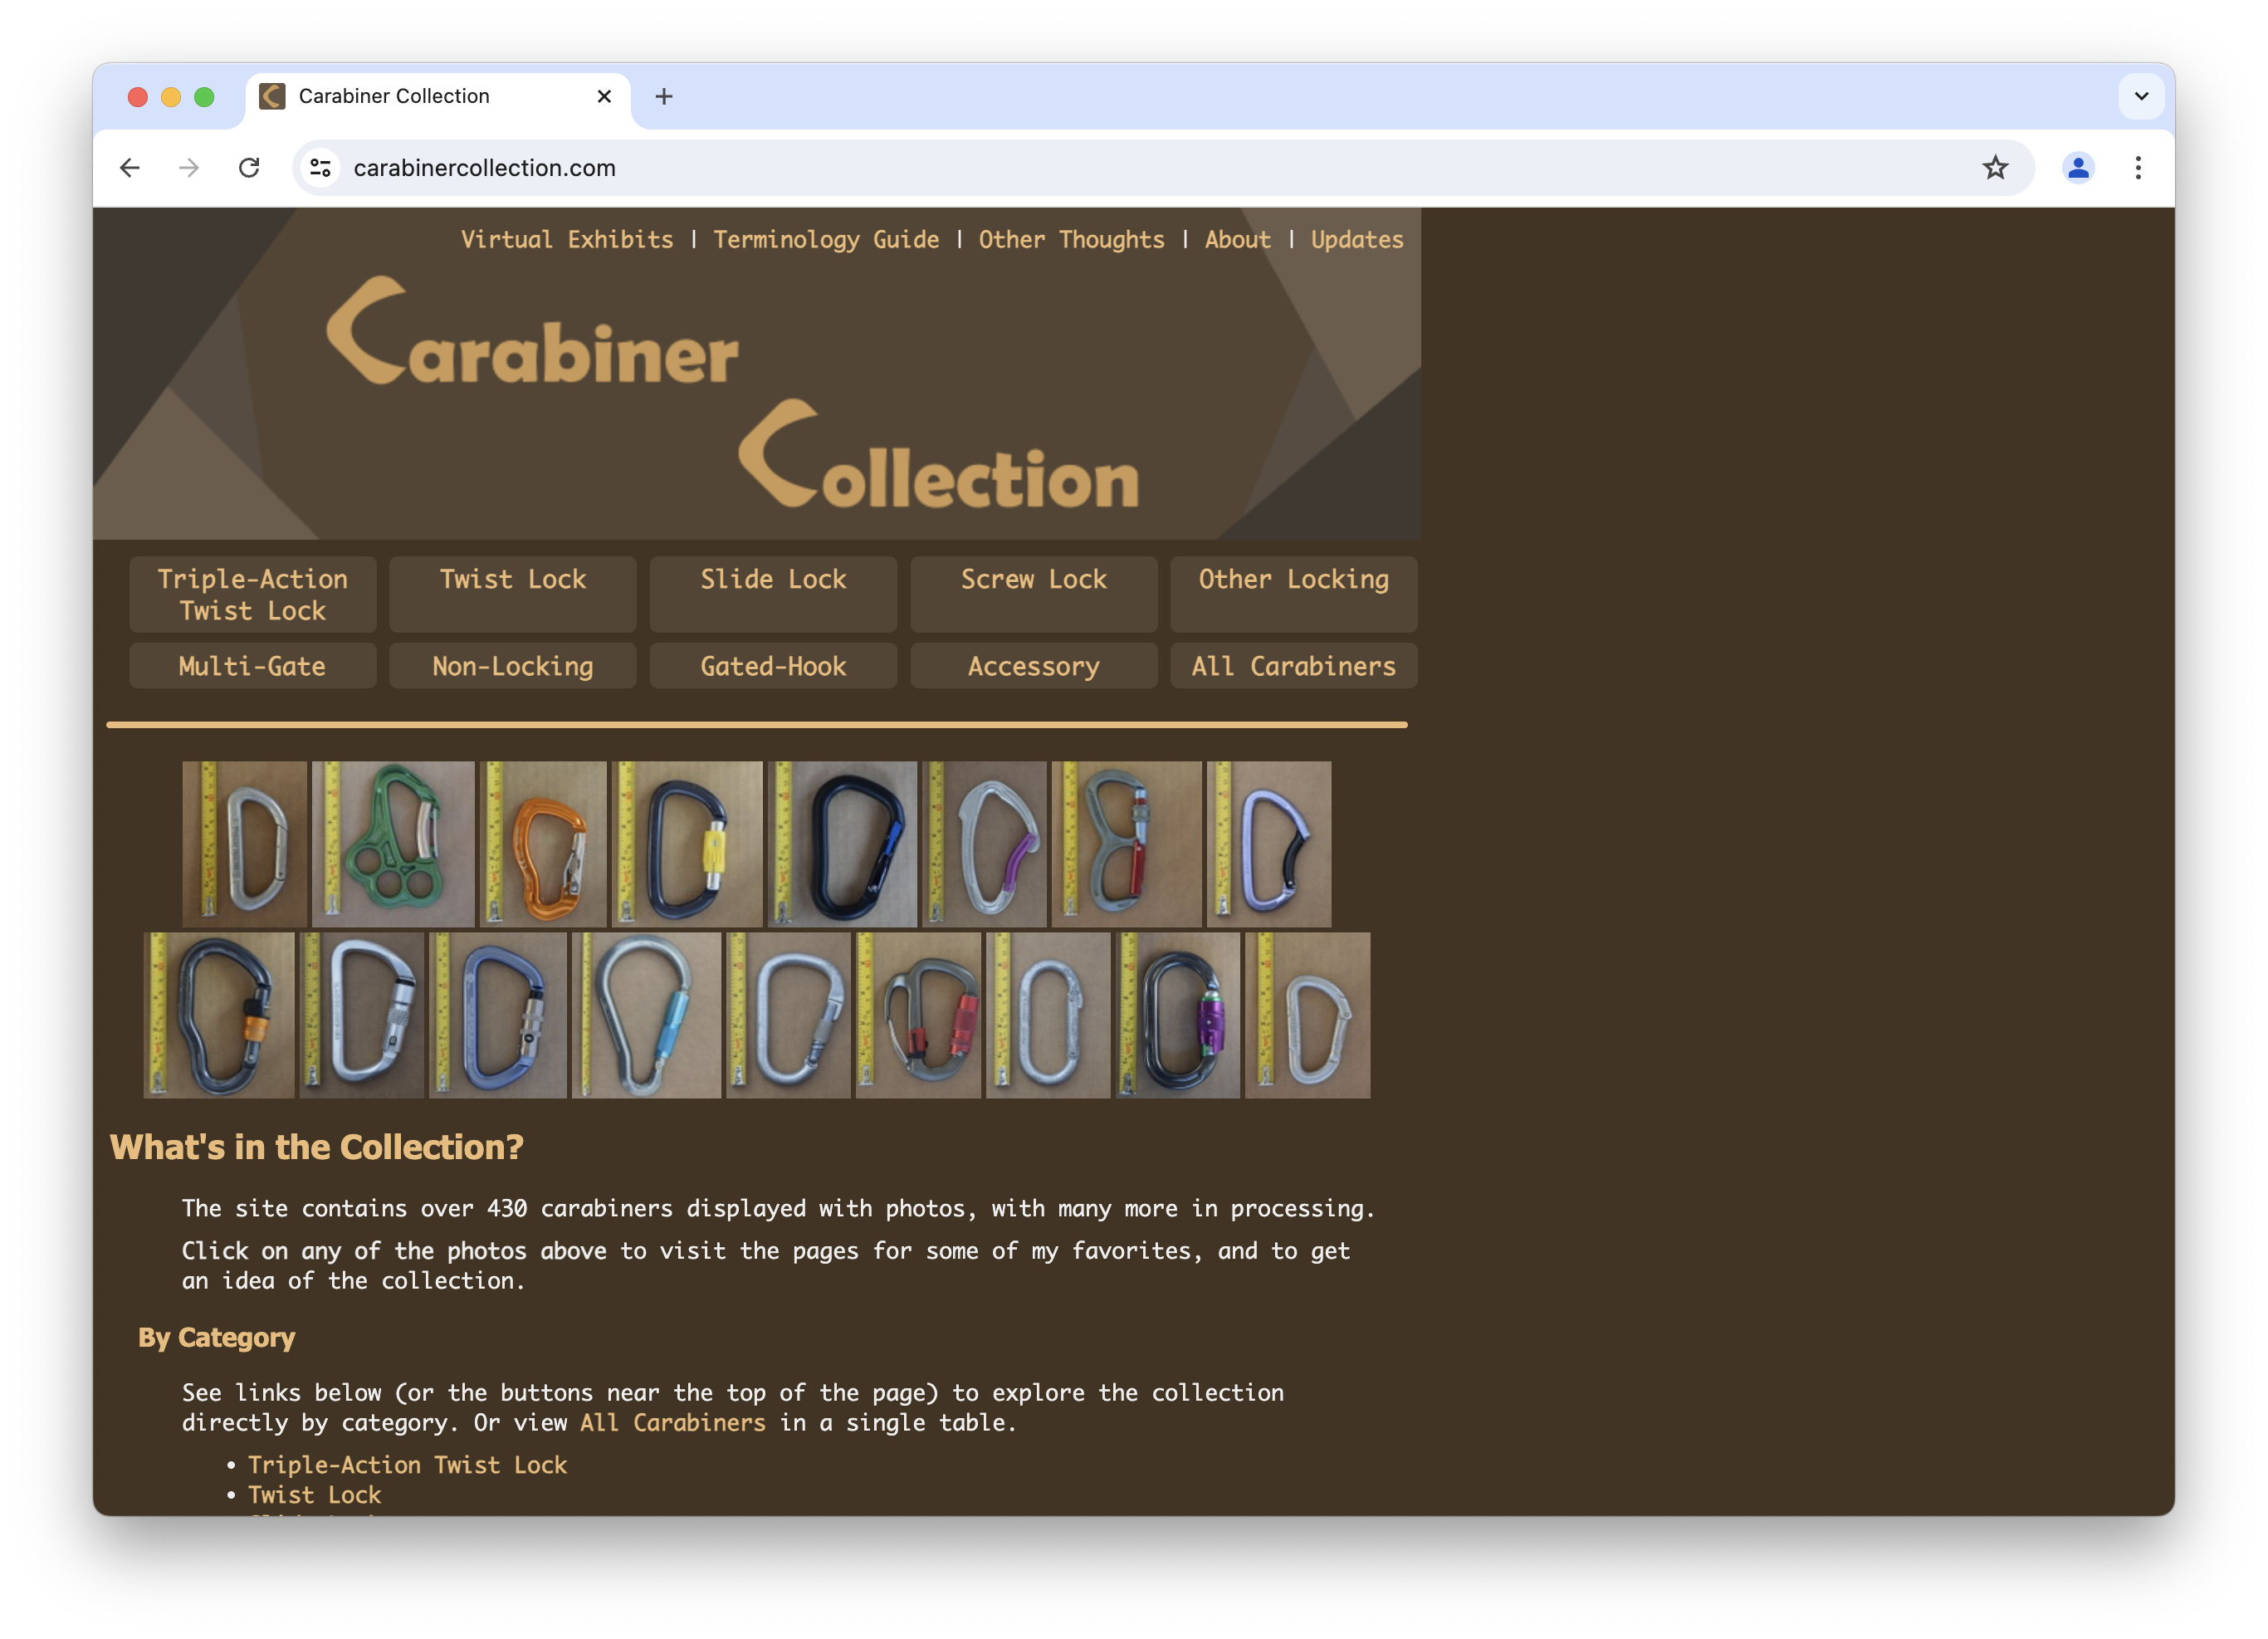 The Carabiner Collection website